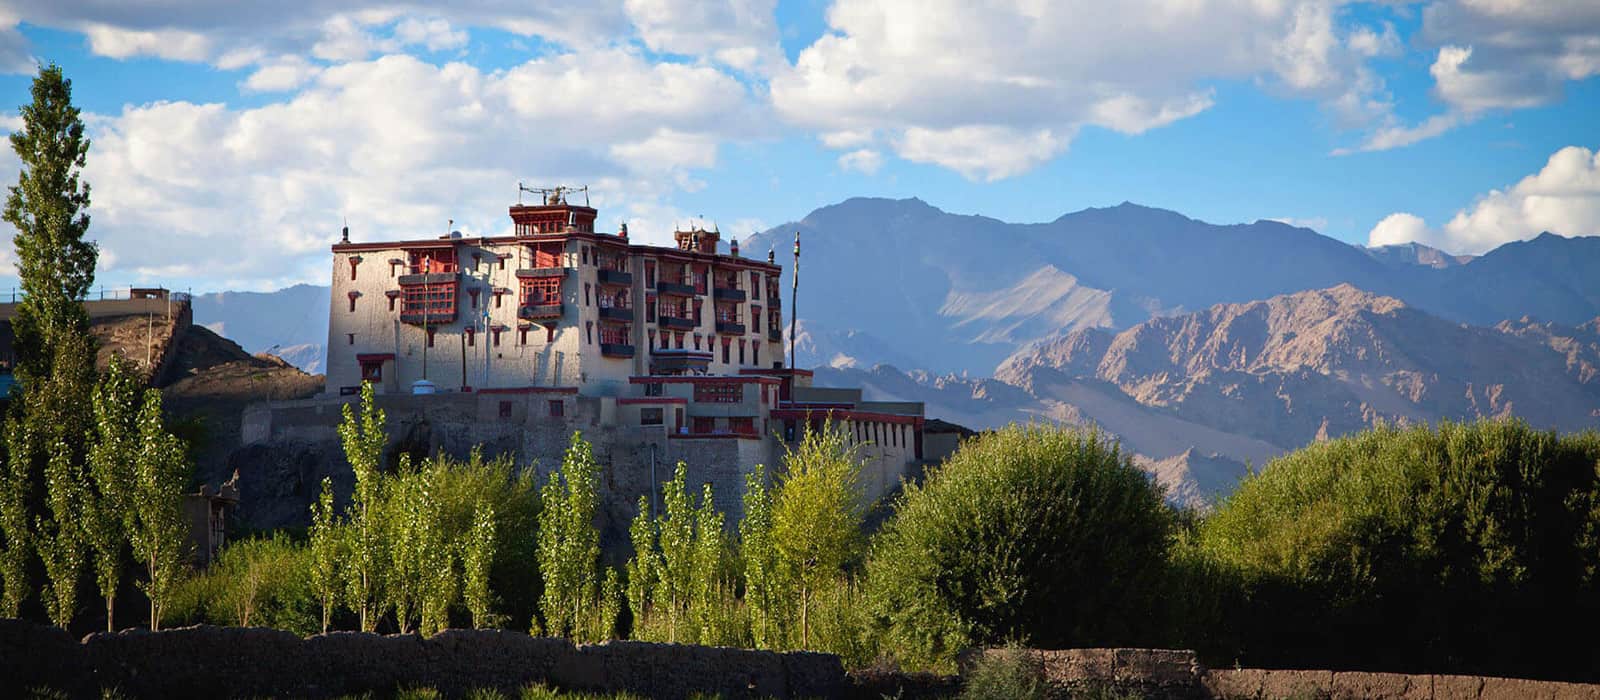 Shey and Stok palace in Ladakh